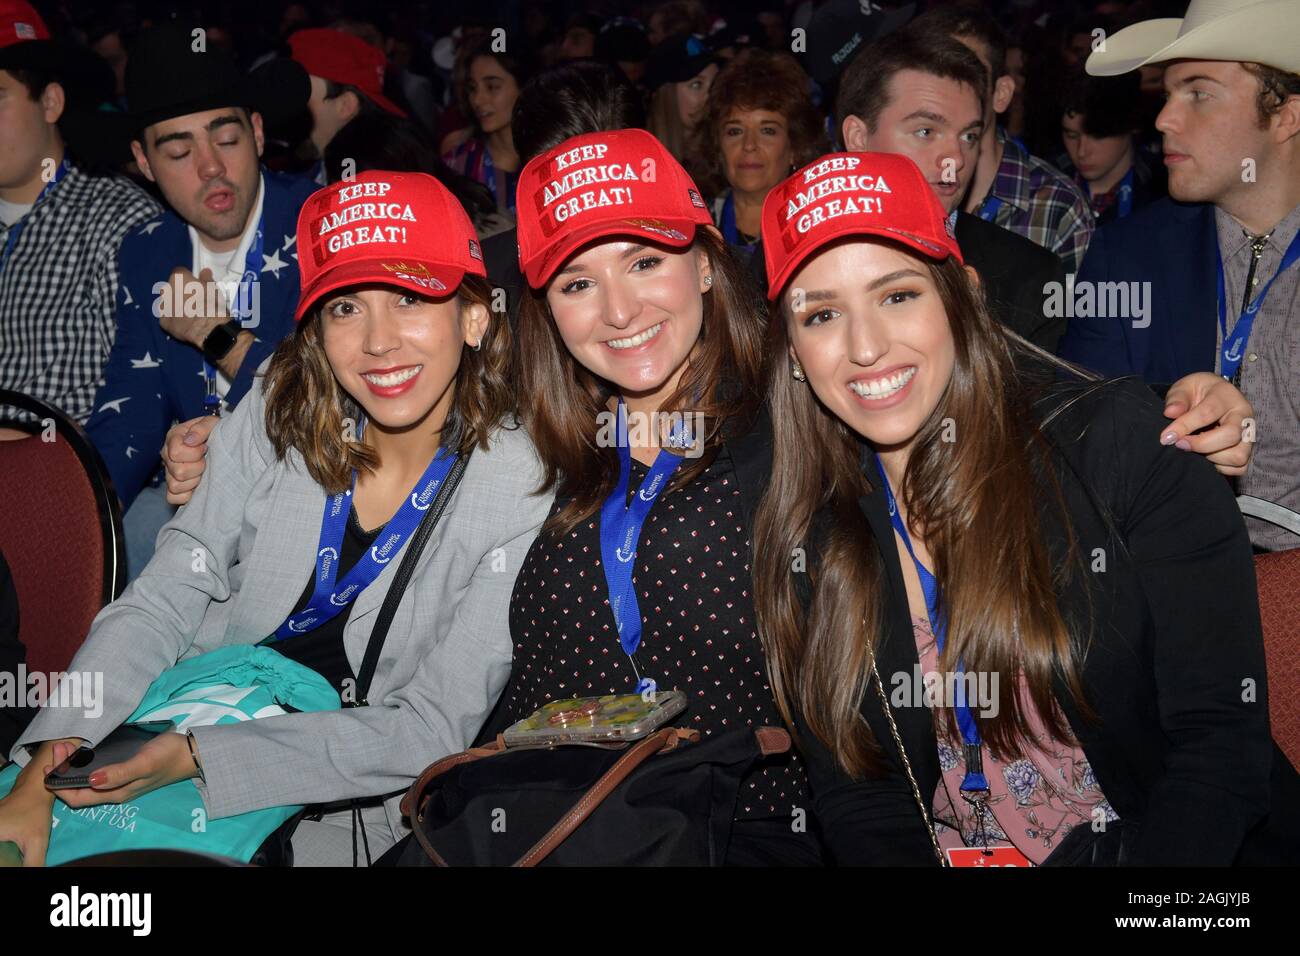 West Palm Beach, Florida, USA. 19th December, 2019.  Atmosphere at the 2019 Turning Point USA Student Action Summit - Day 1 at the Palm Beach County Convention Center on December 19, 2019 in West Palm Beach, Florida.   People:  Atmosphere Stock Photo